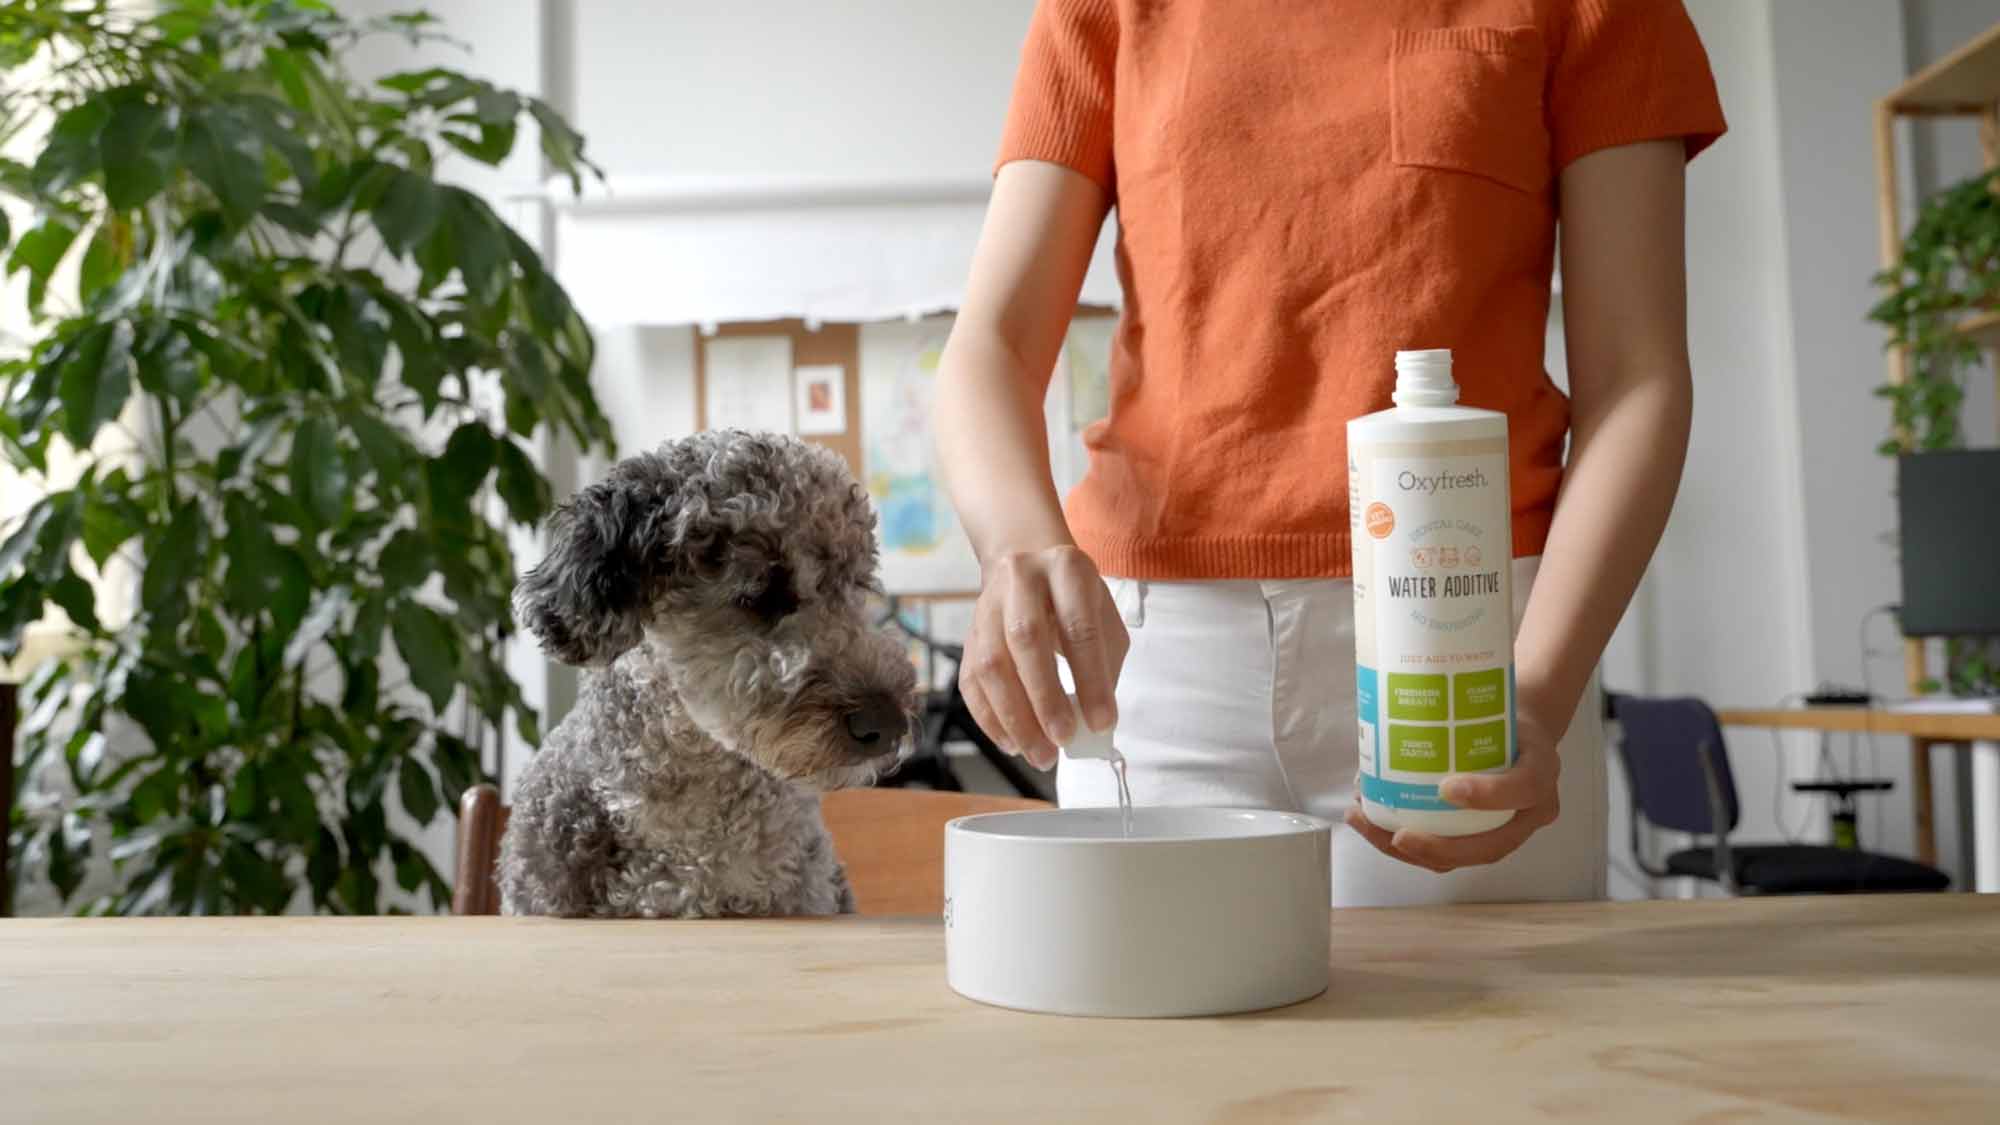 woman pouring oxyfresh pet water additive into a bowl on the counter as her dog looks on